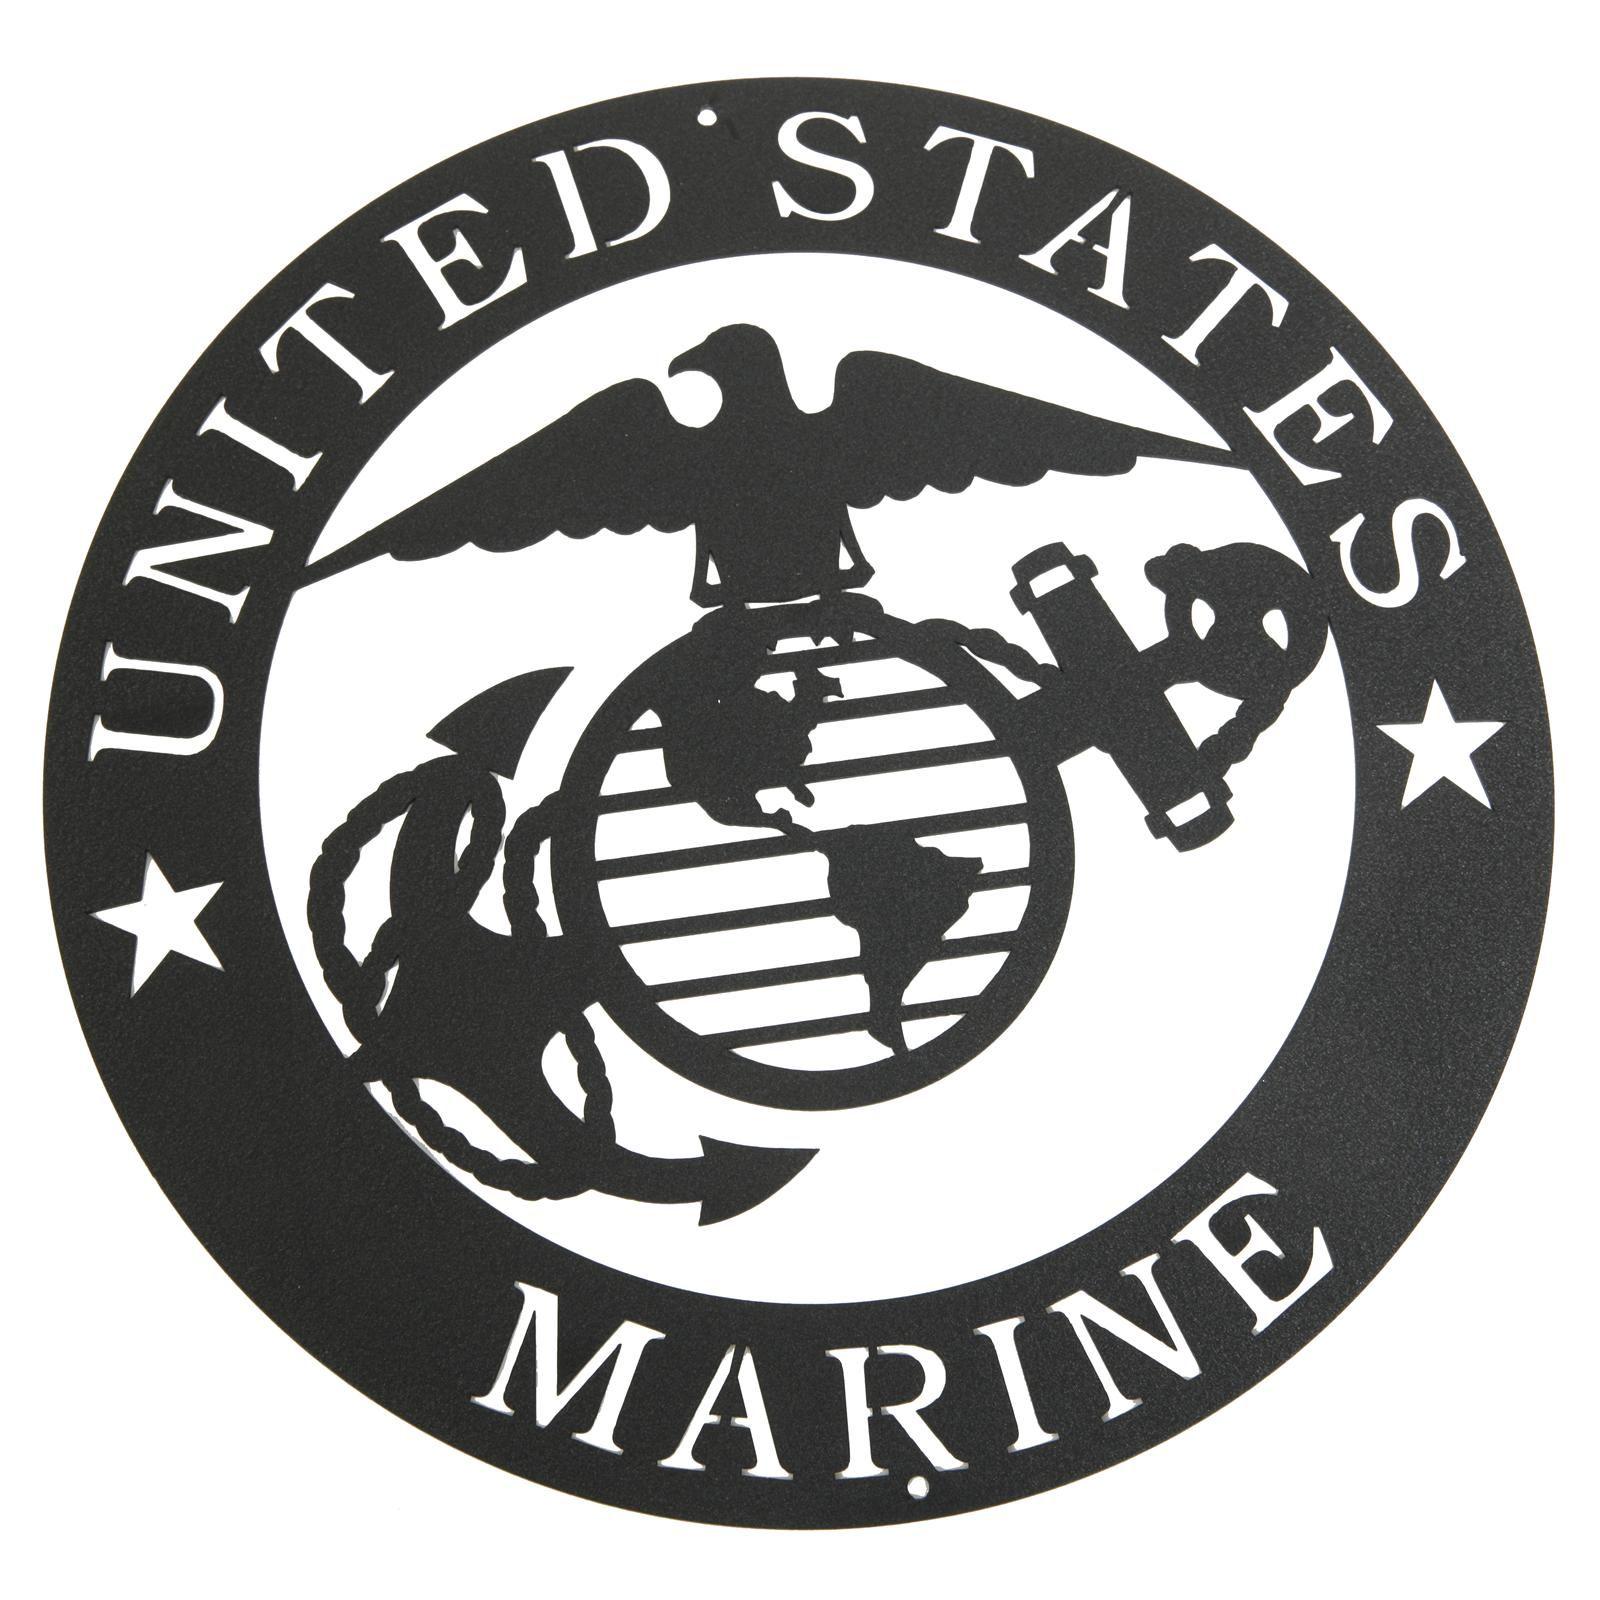 United States Marines Logo - Marines Corps Emblem Metal Silhouette 3025 - Free Shipping on Orders ...